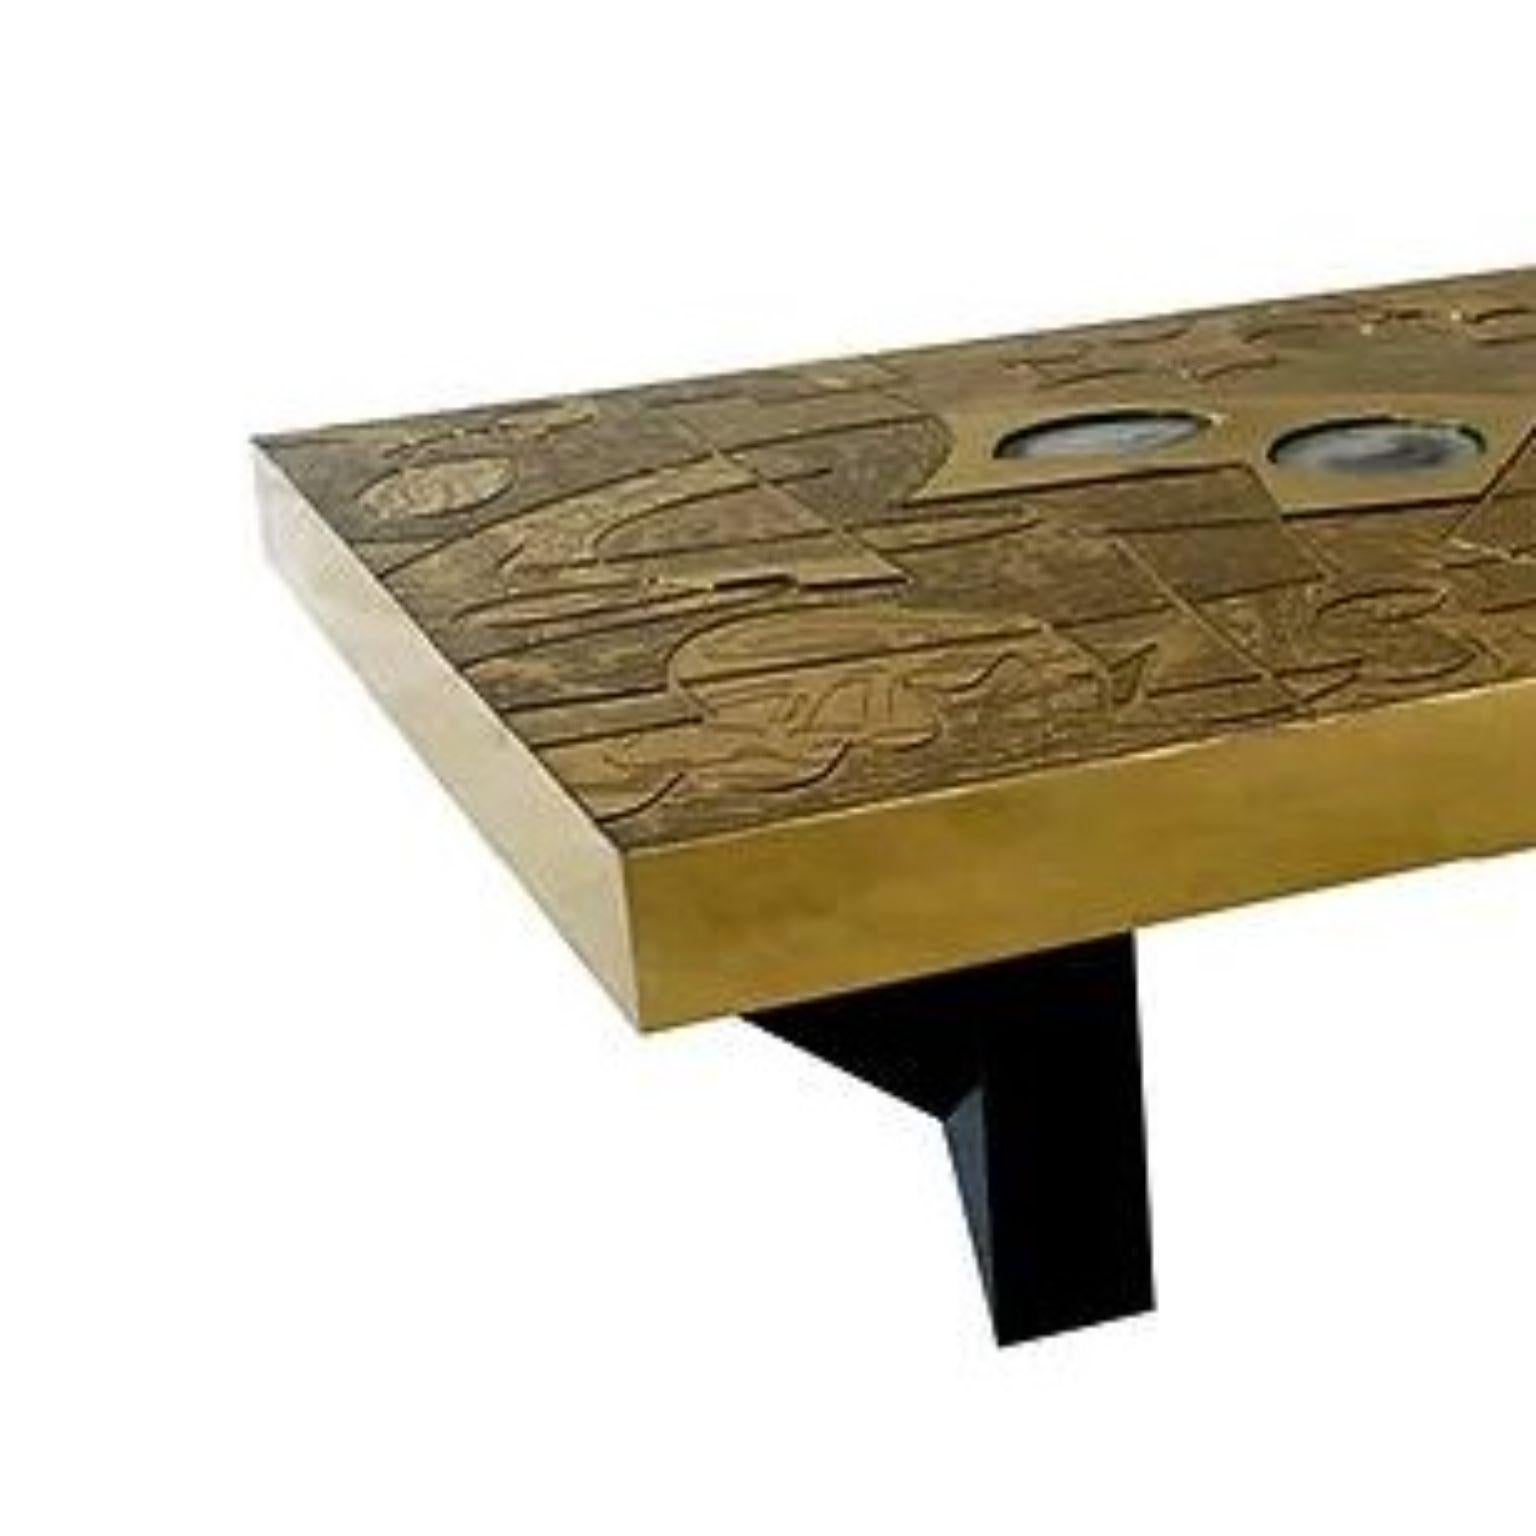 Horizon 2 Stone And Brass Coffee Table by Brutalist Be
One Of A Kind
Dimensions: D 79 x W 120 x H 35 cm.
Materials: Brass and agate stone.

Also available in copper and in matte, glossy or black-patinated finishes. Please contact us. 

Abstract hand